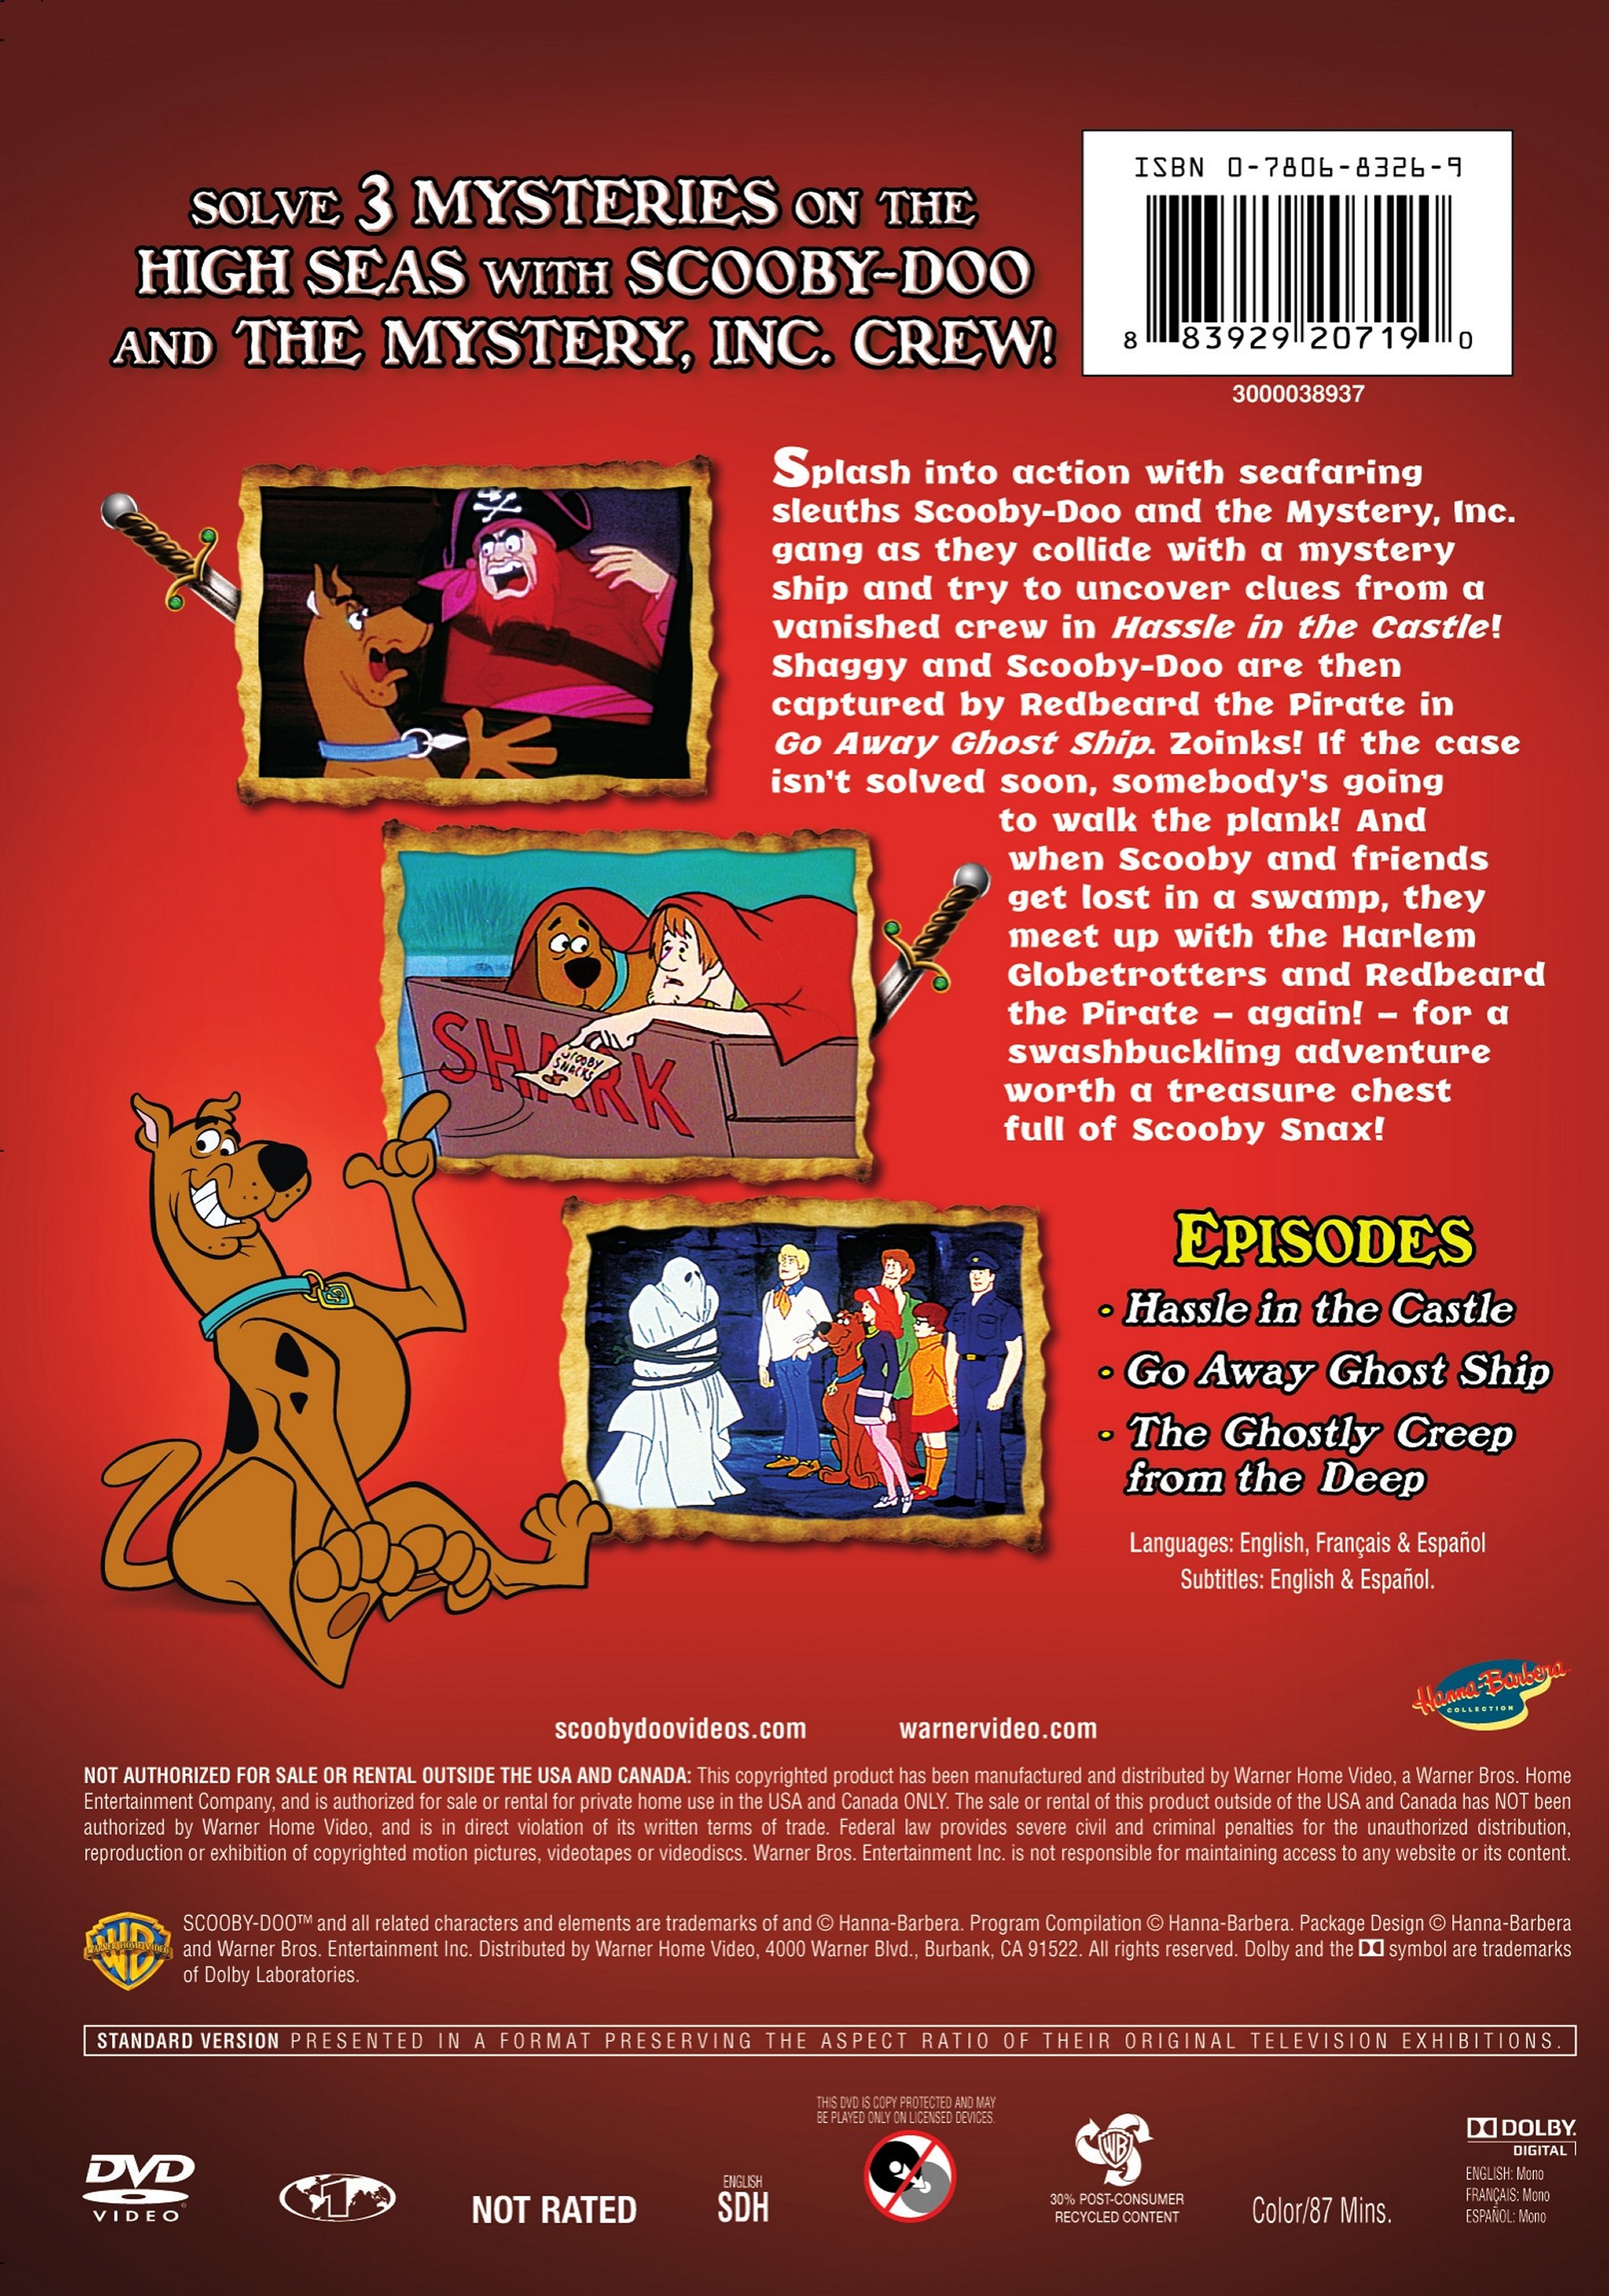 Scooby-Doo! And the Pirates (DVD), Warner Home Video, Animation - image 2 of 3